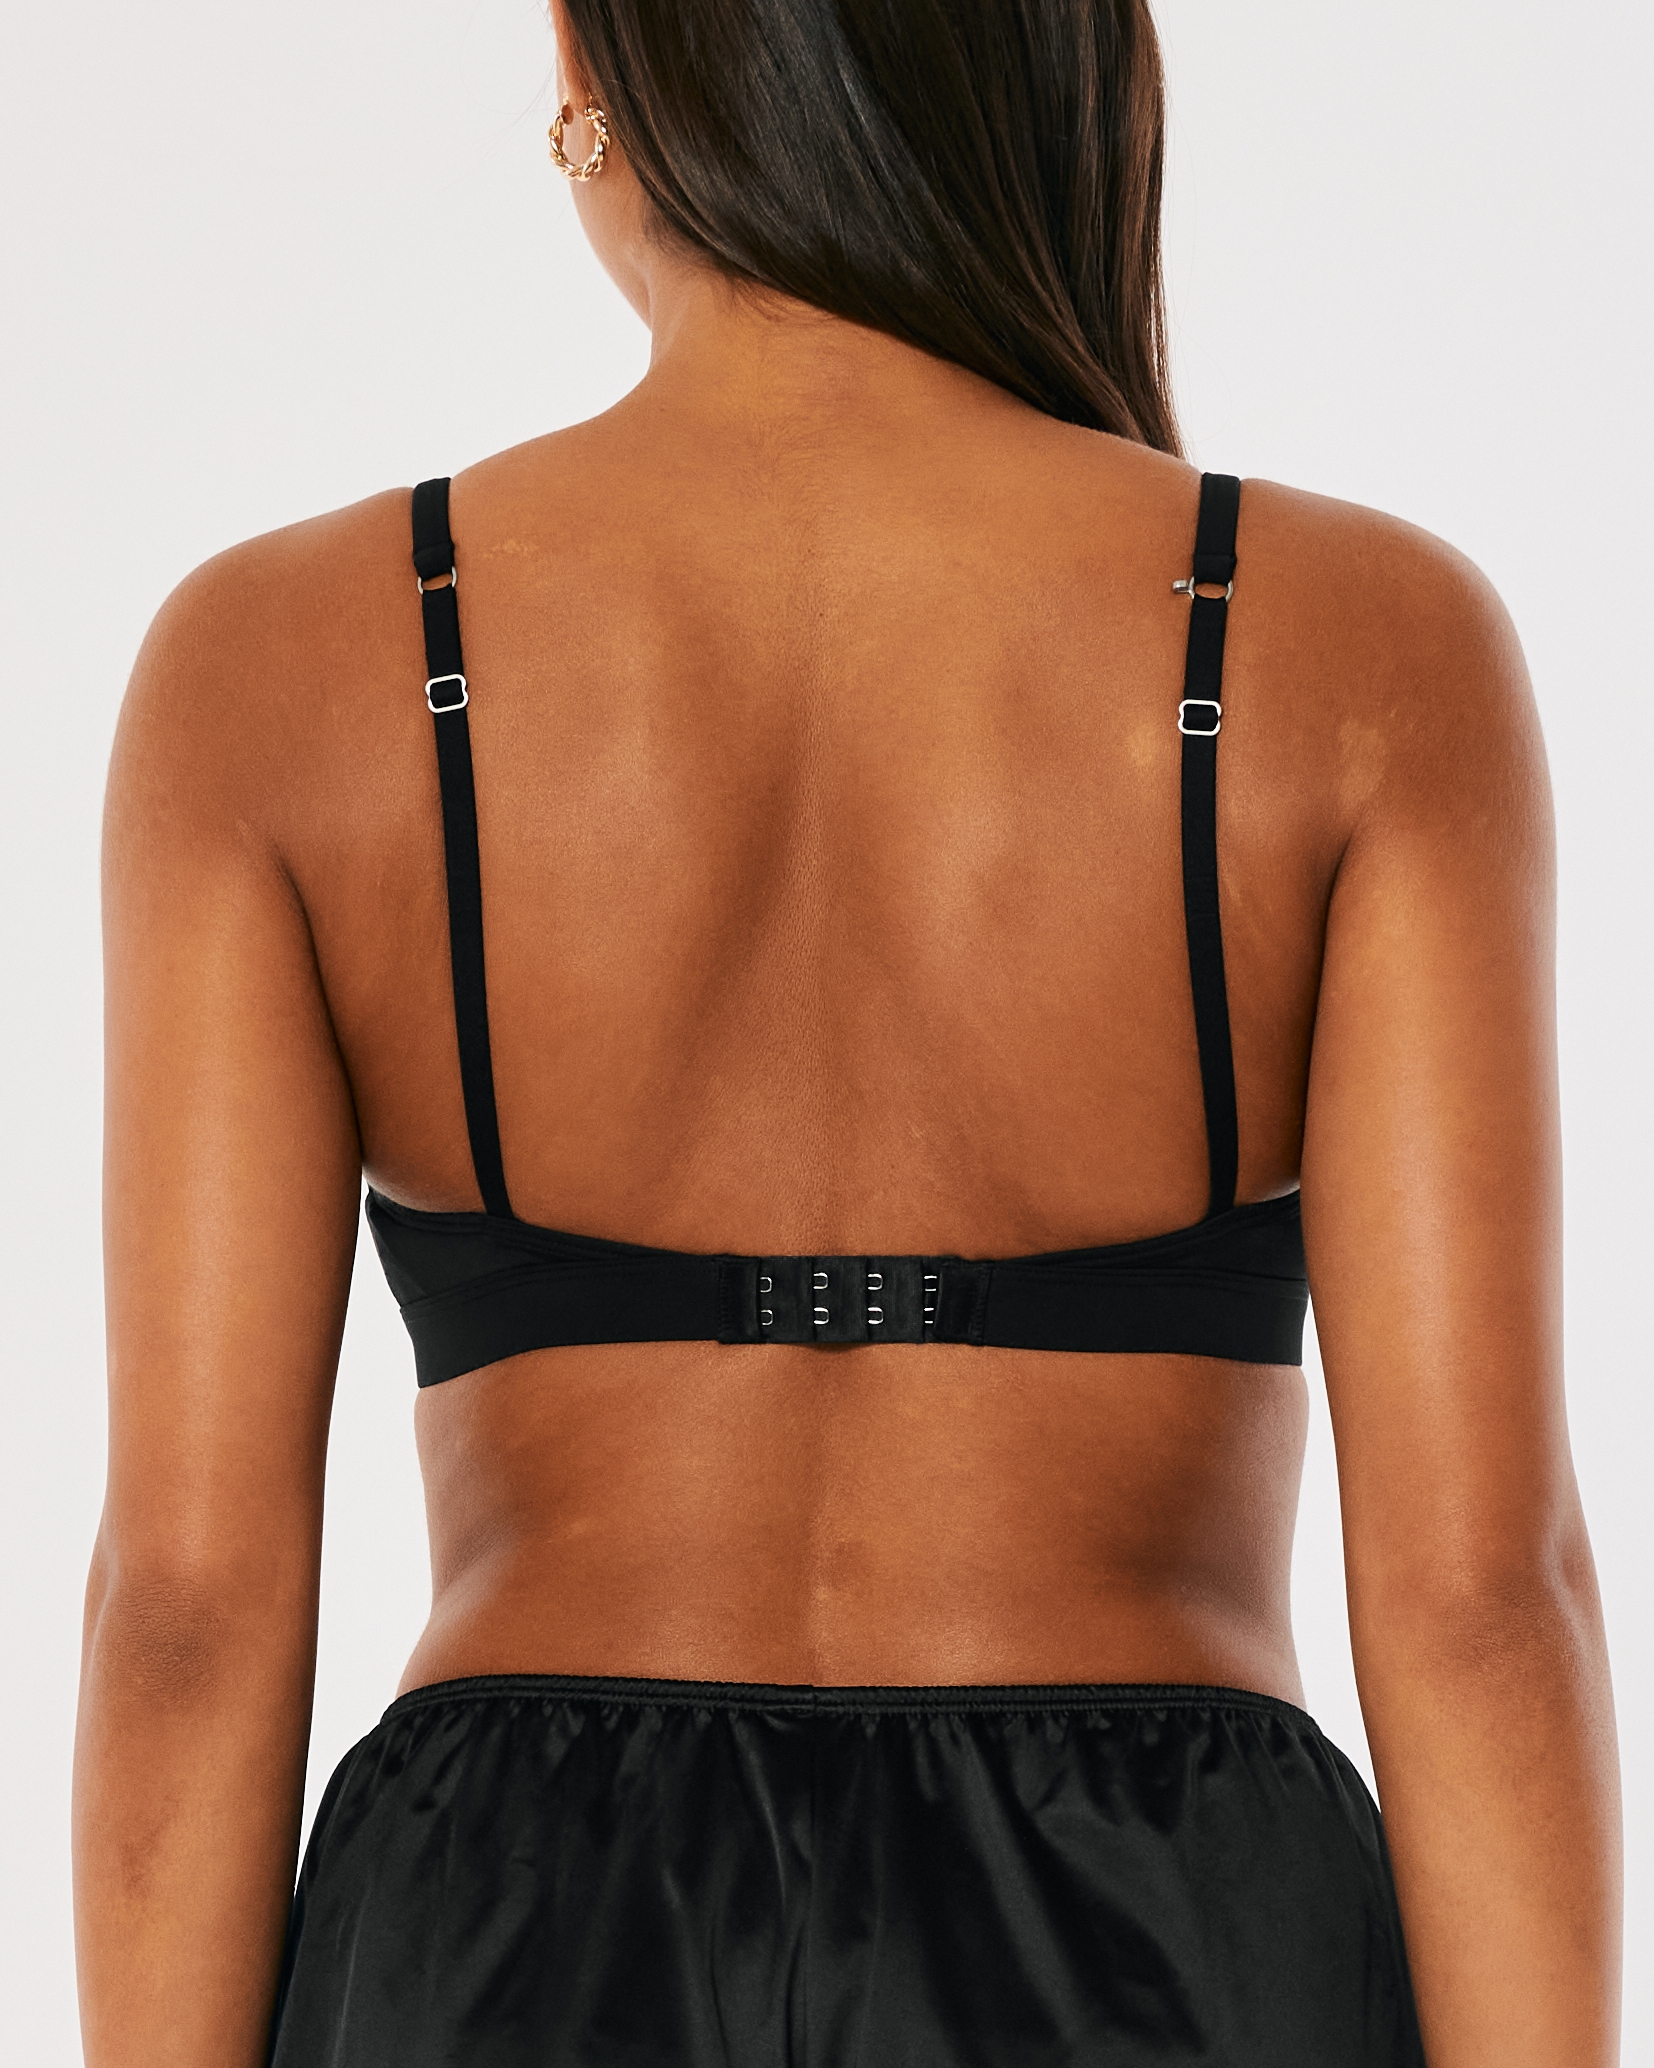 Hollister Gilly Hicks Longline Lace Triangle Bralette